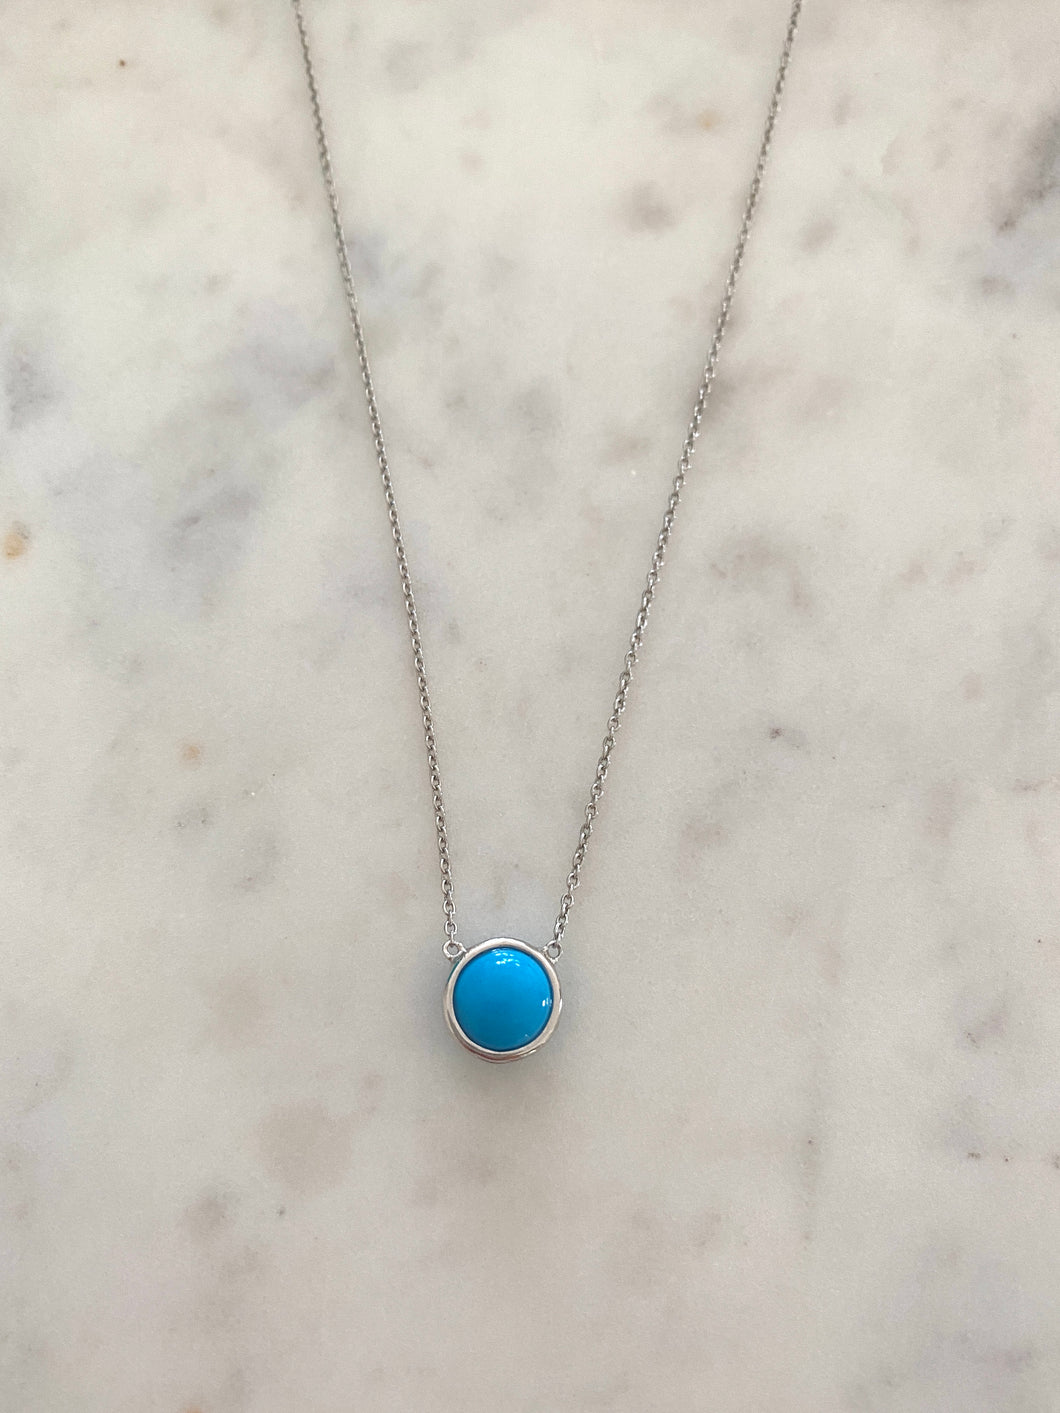 The Turquoise cabochon necklace